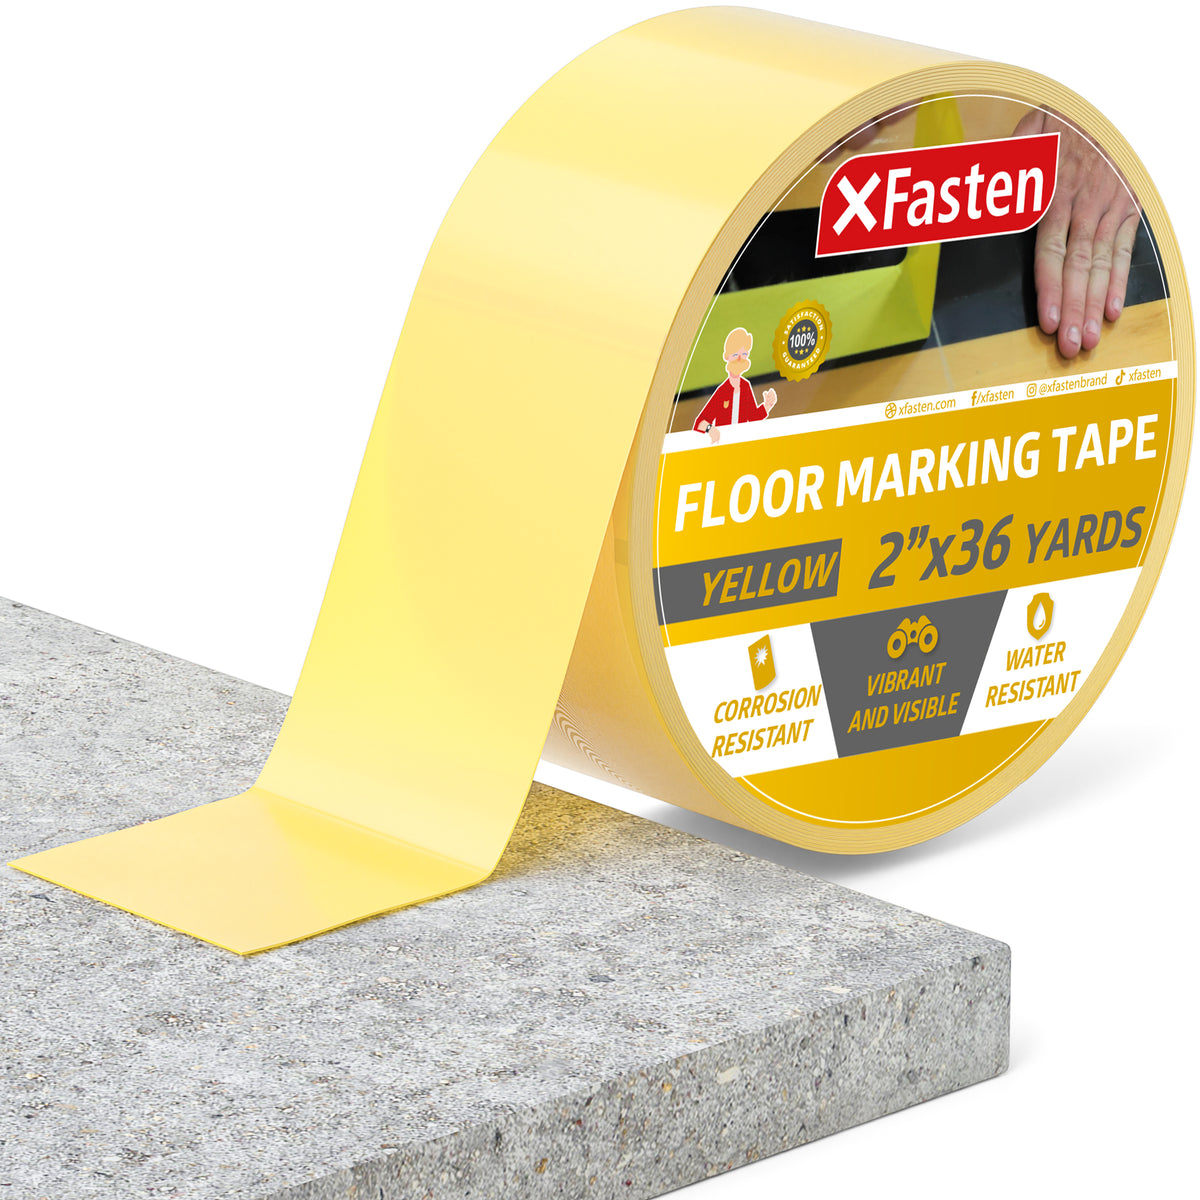 Woodworking Tape XFasten, 1-Inch x 36 Yards, No-Residue Adhesion